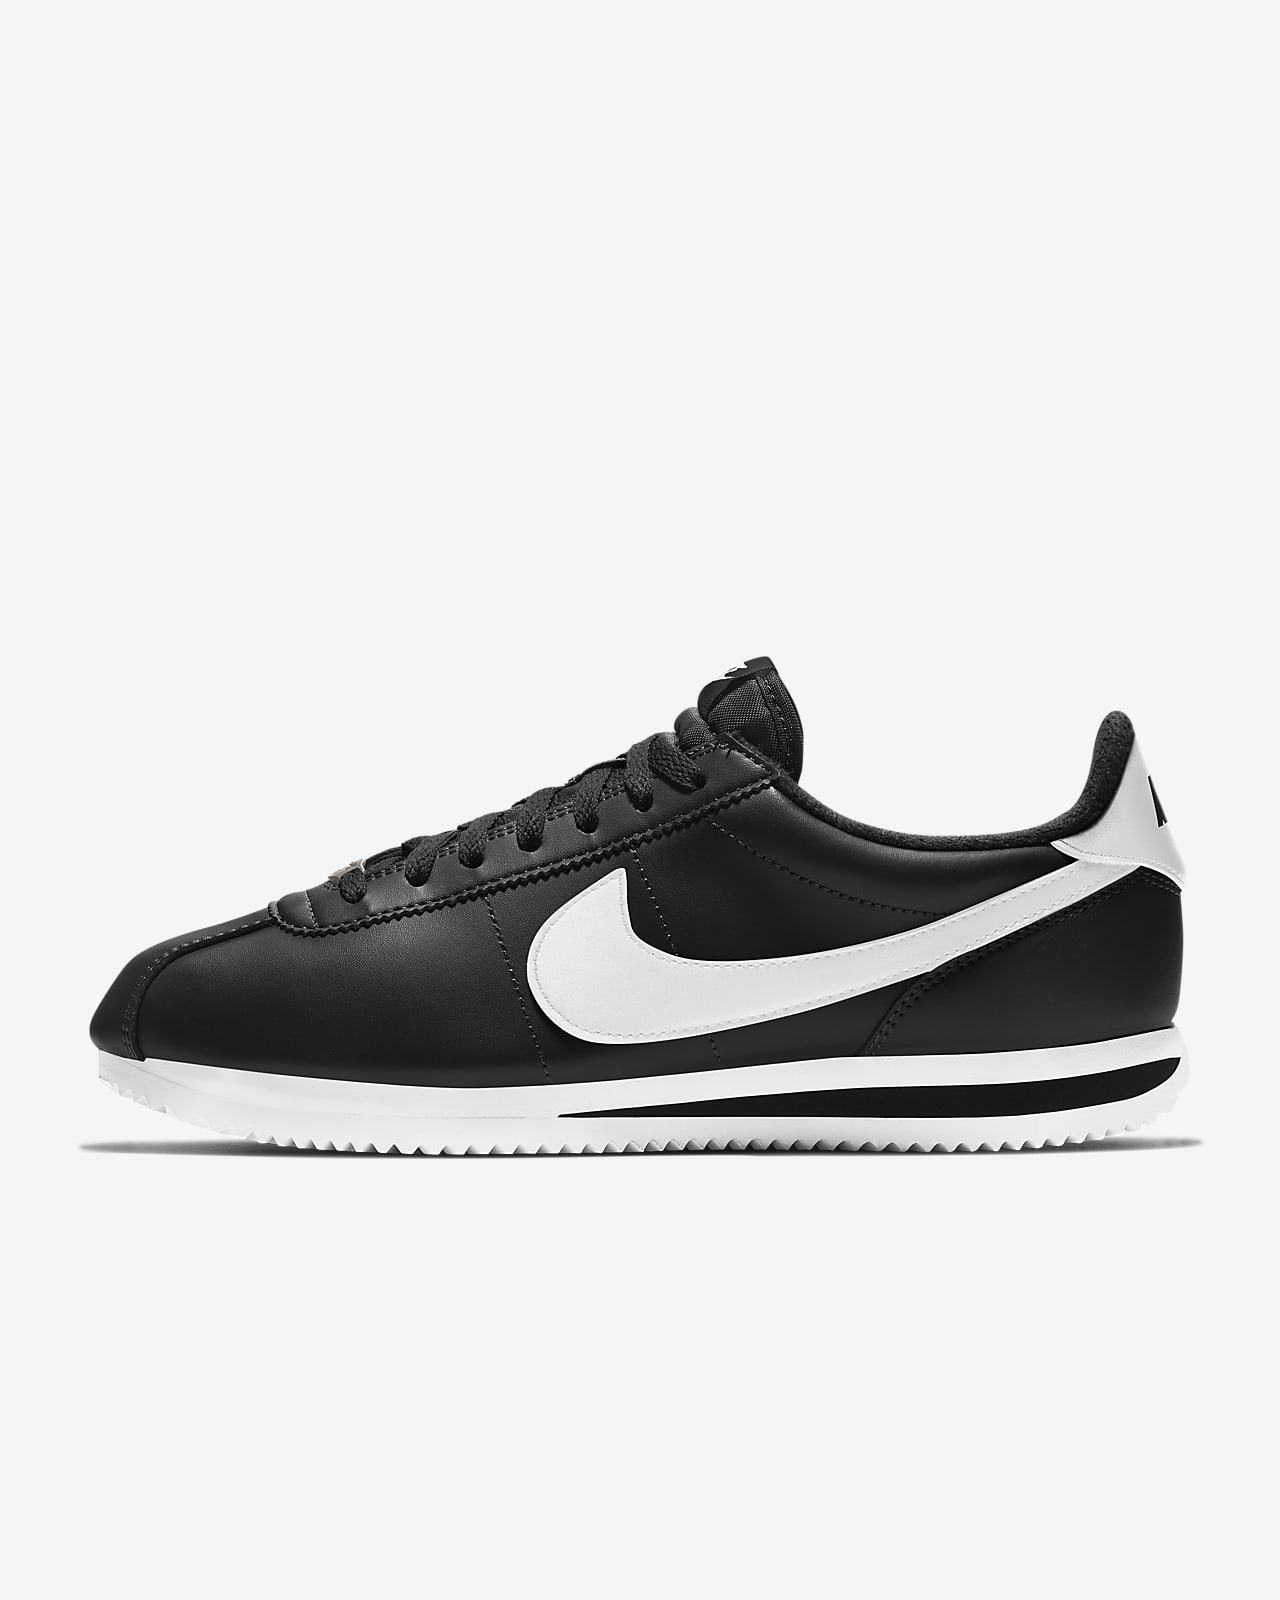 nike cortez black and white outfit